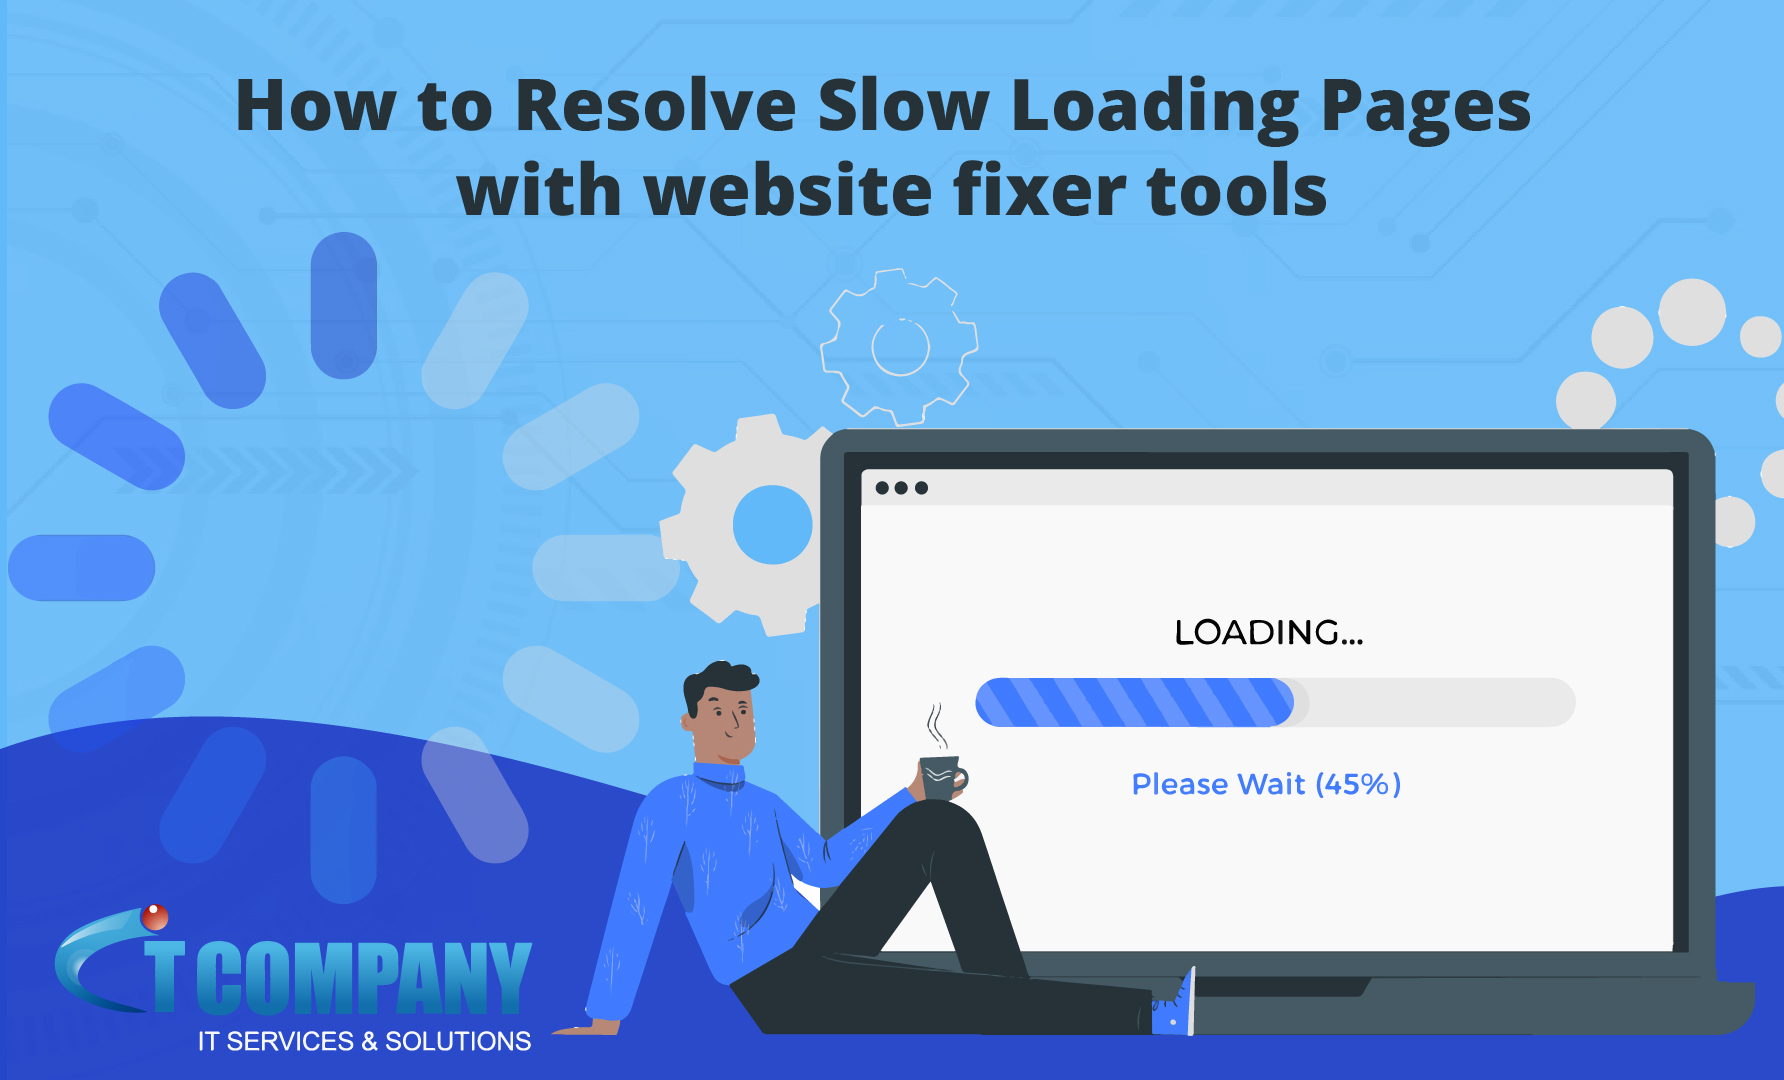 How to Resolve Slow Loading Pages with Website Fixer Tools?